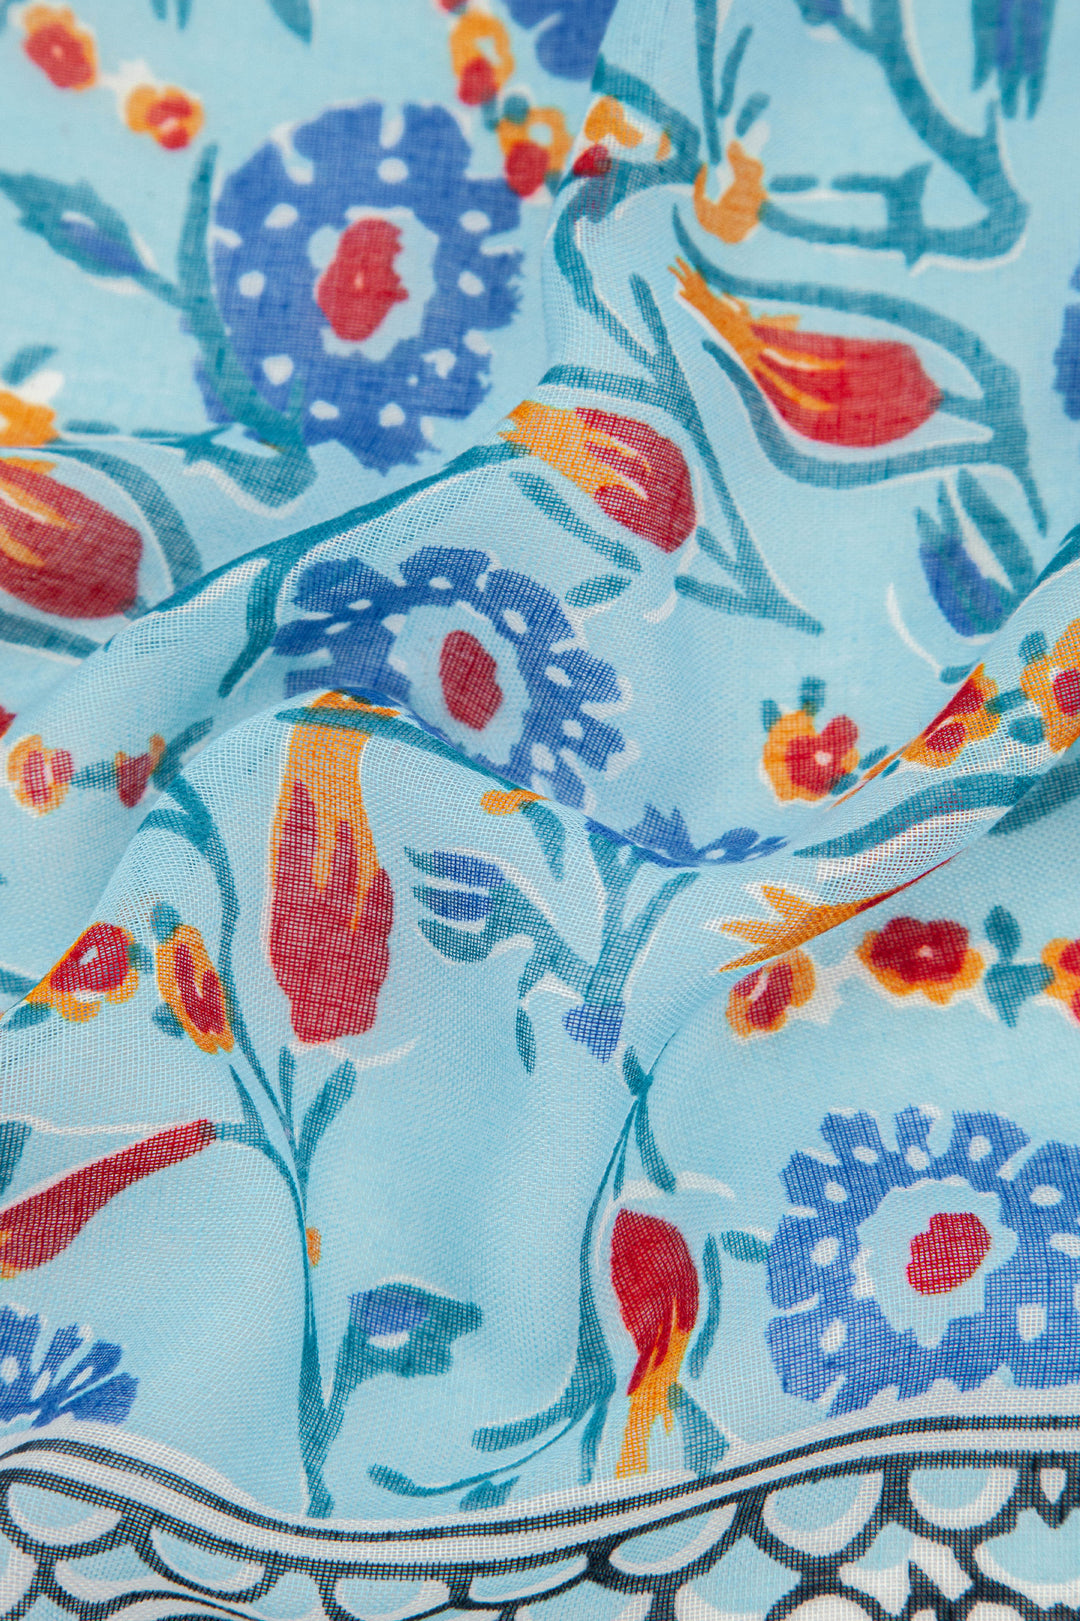 close up of the blue and red floral print pattern 